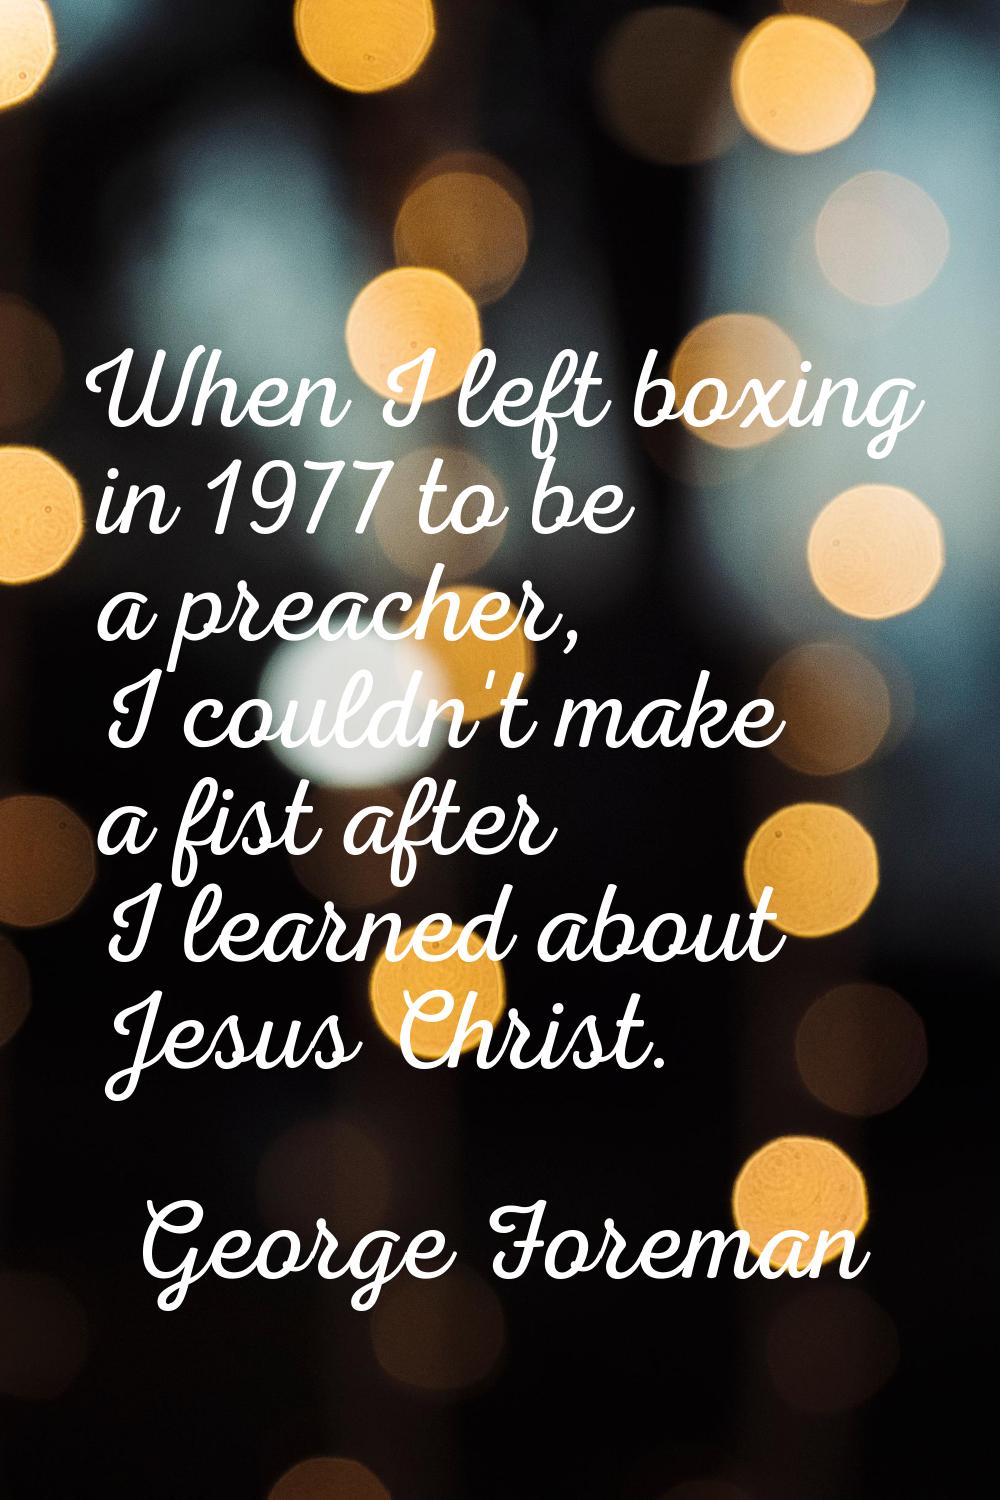 When I left boxing in 1977 to be a preacher, I couldn't make a fist after I learned about Jesus Chr